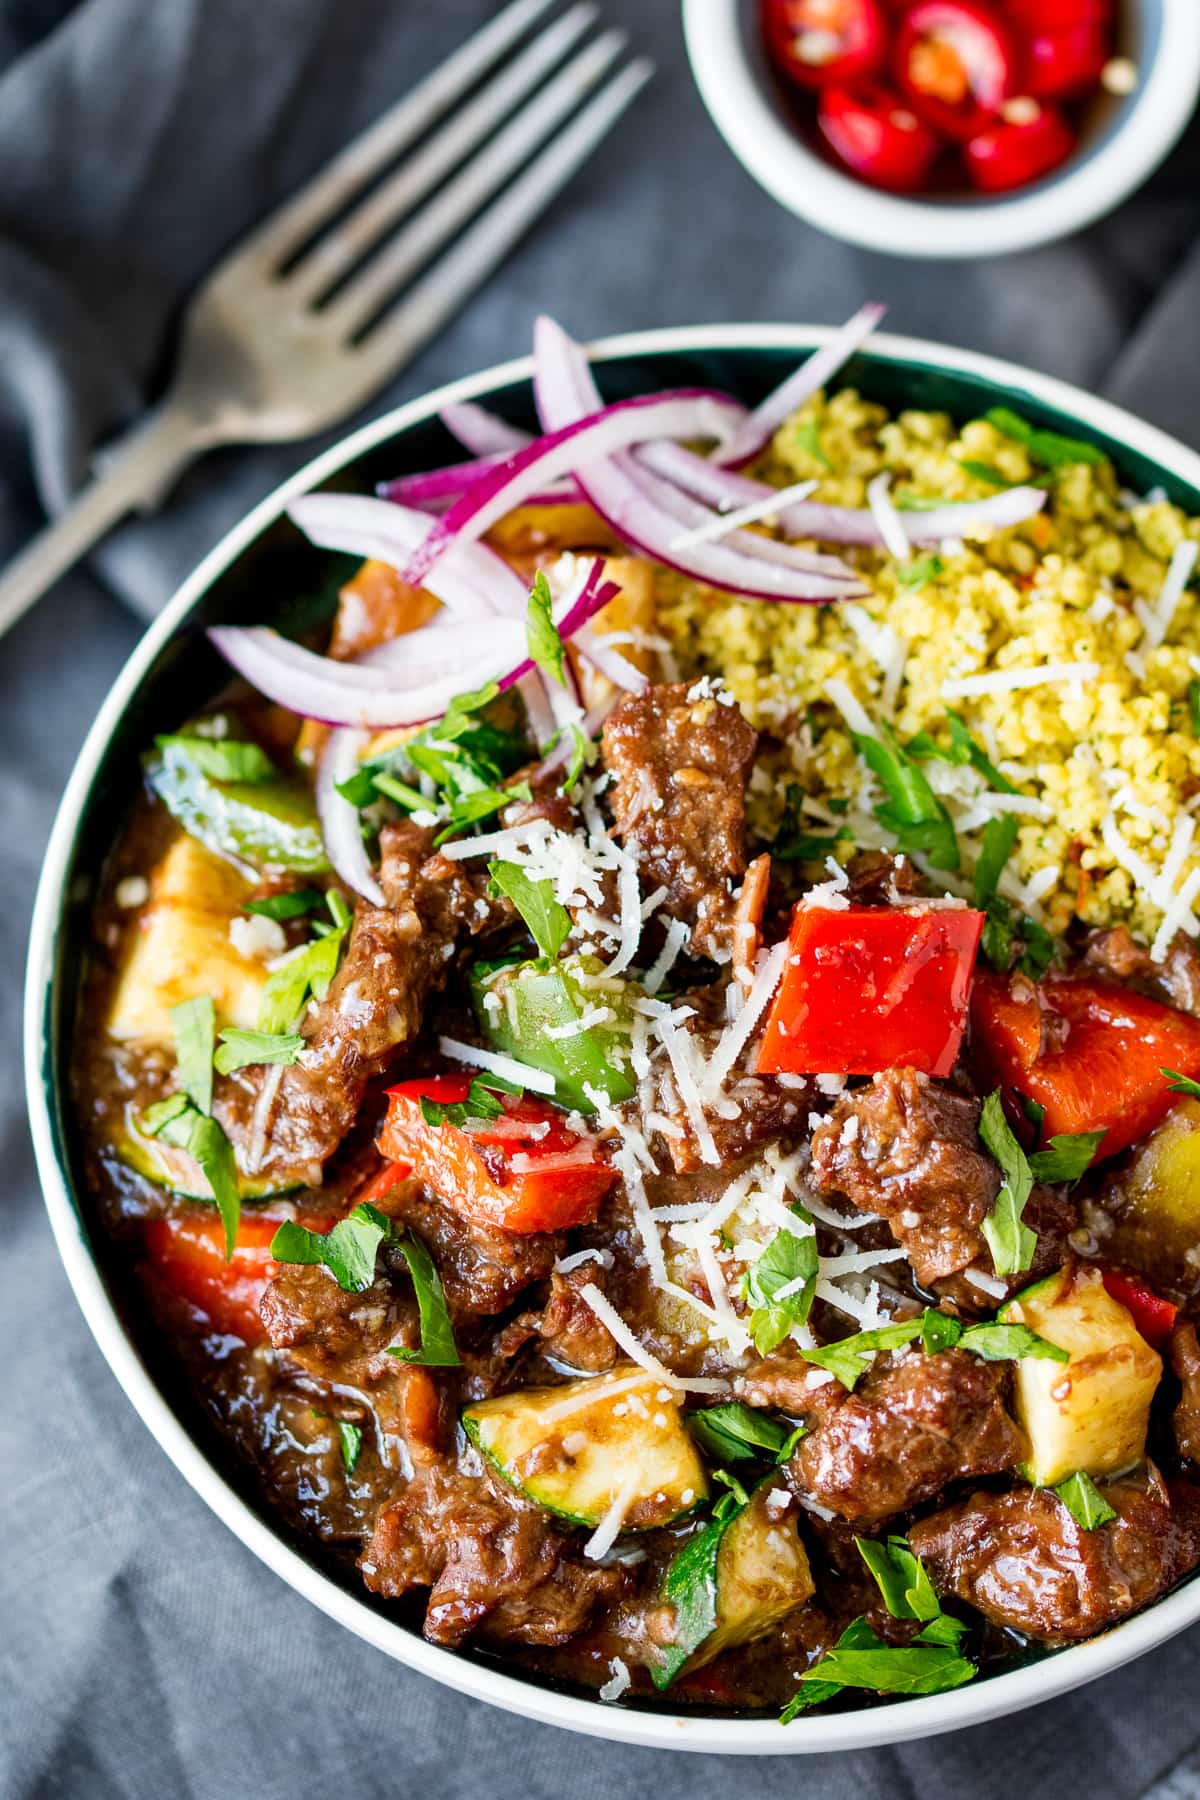 Slow Cooked Summer Beef Casserole in a bowl with couscous, red onions and parmesan.